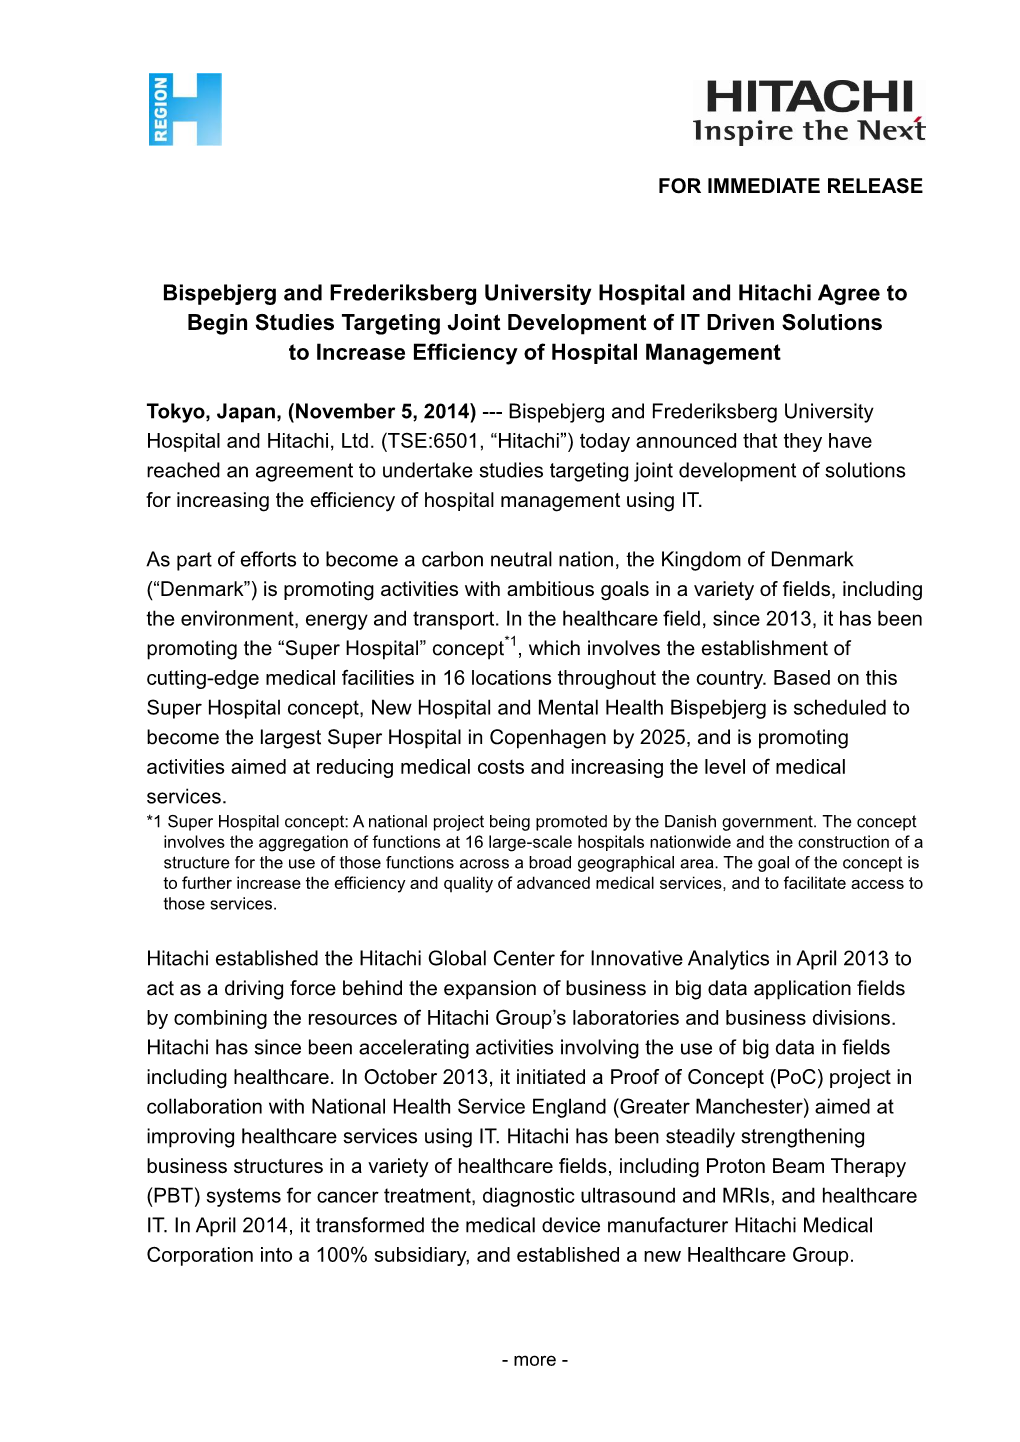 Bispebjerg and Frederiksberg University Hospital and Hitachi Agree to Begin Studies Targeting Joint Development of IT Driven